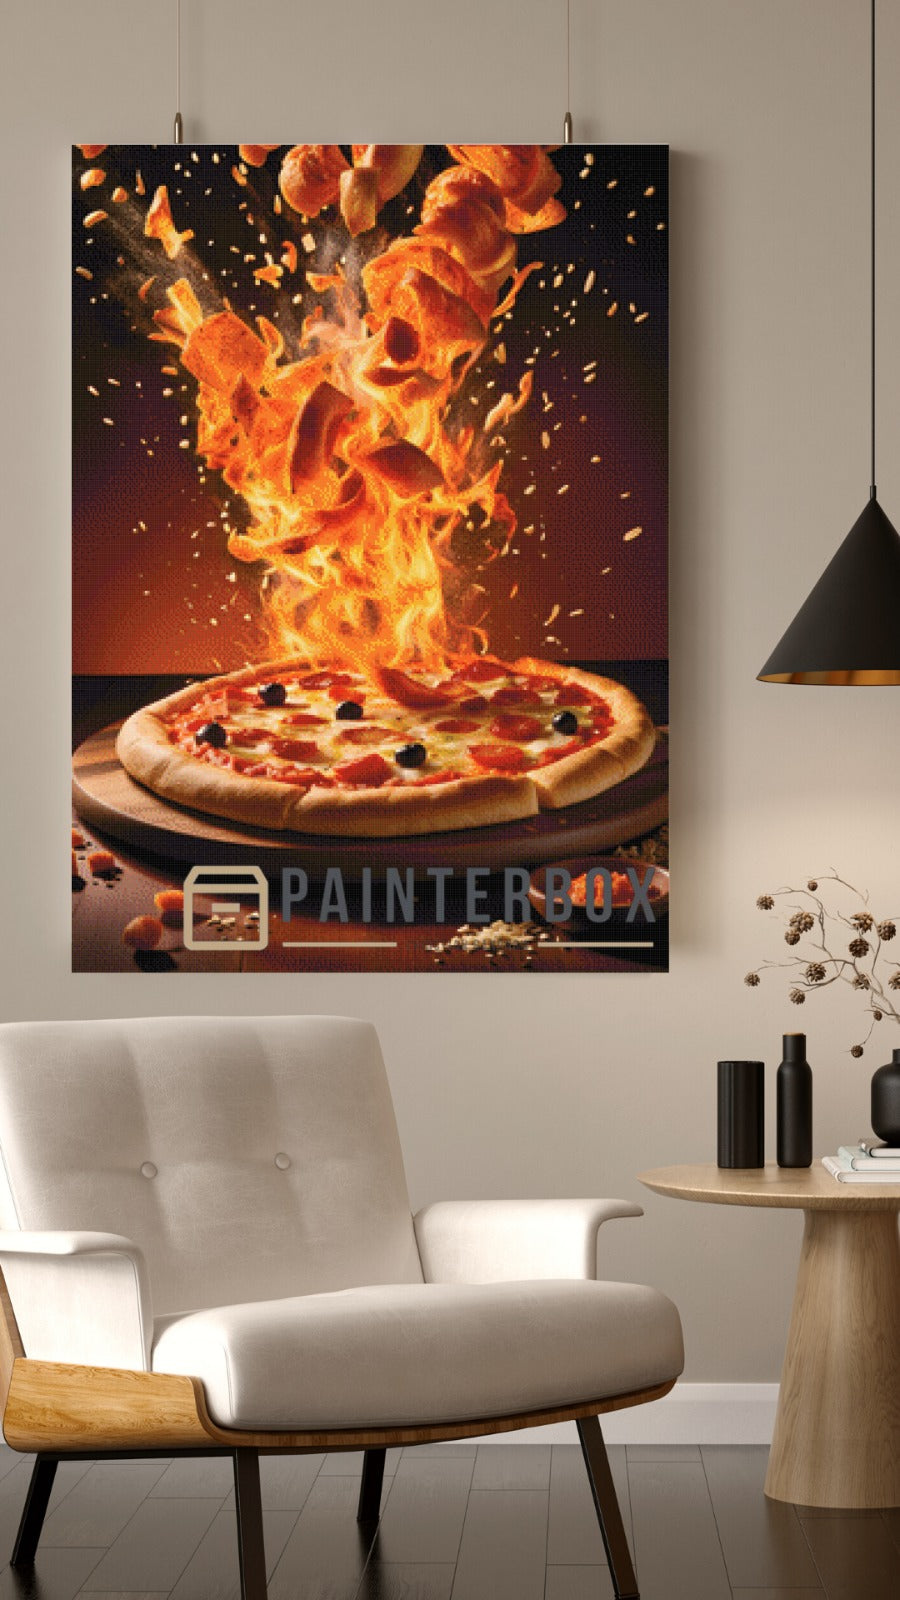 Pizza on Fire by PiXXel Pics - 140 Farben